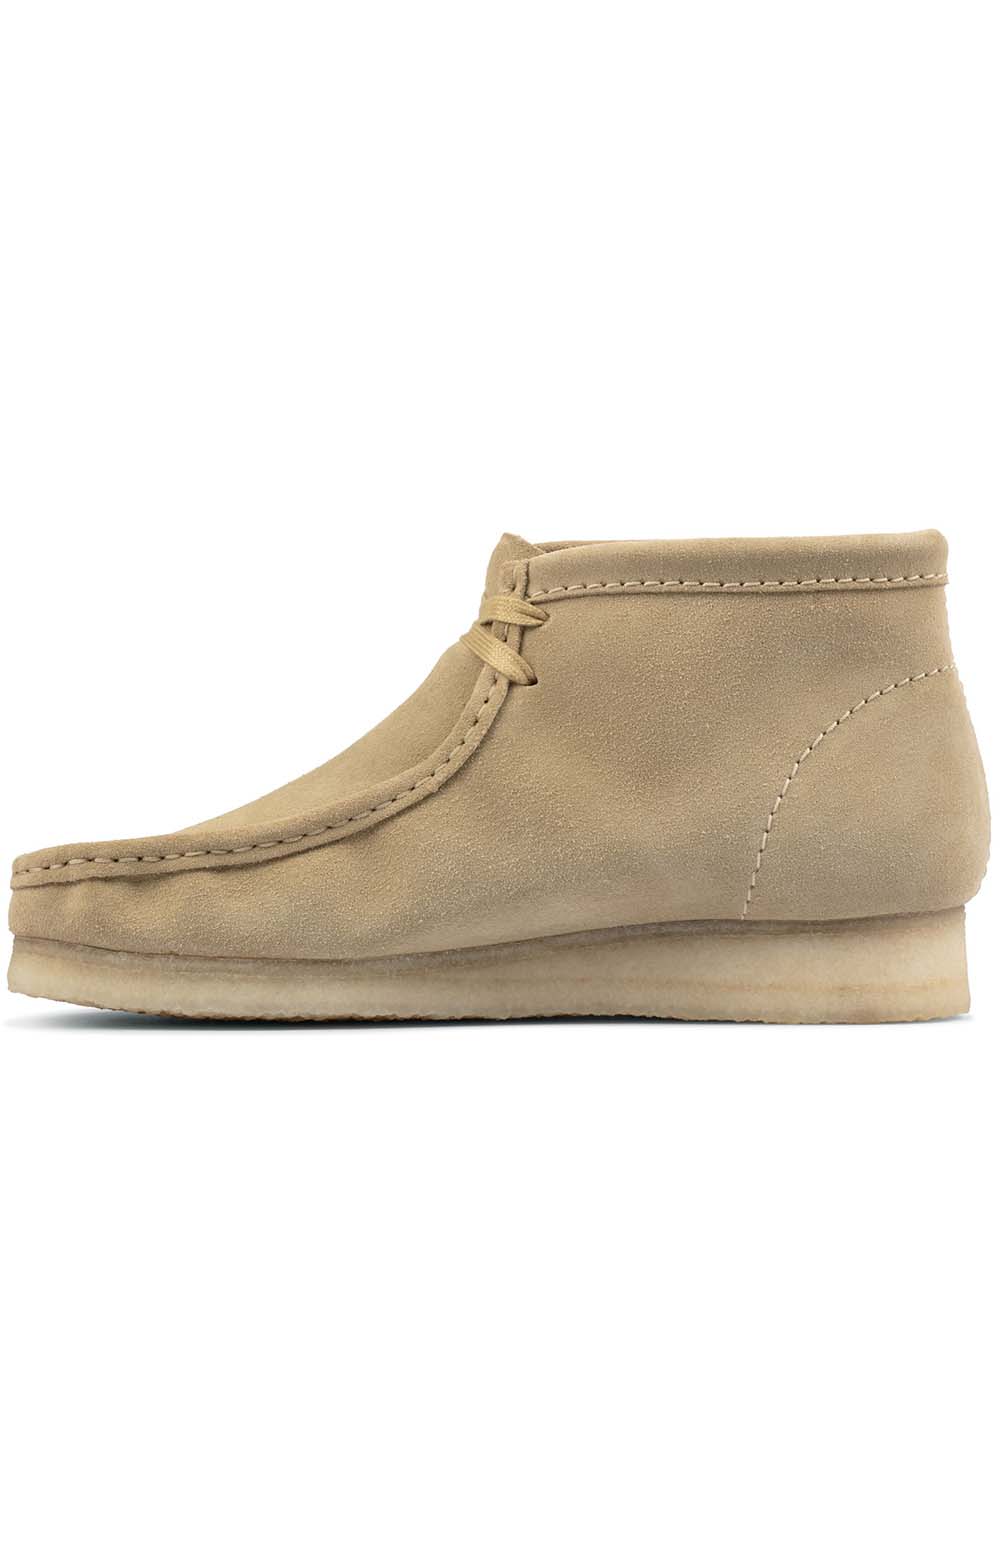 Close-up of the Clarks Originals Wallabee Boot Men's Maple Suede 26155516 showcasing the iconic moccasin-inspired silhouette and high-quality craftsmanship, ideal for adding a touch of sophistication to any outfit